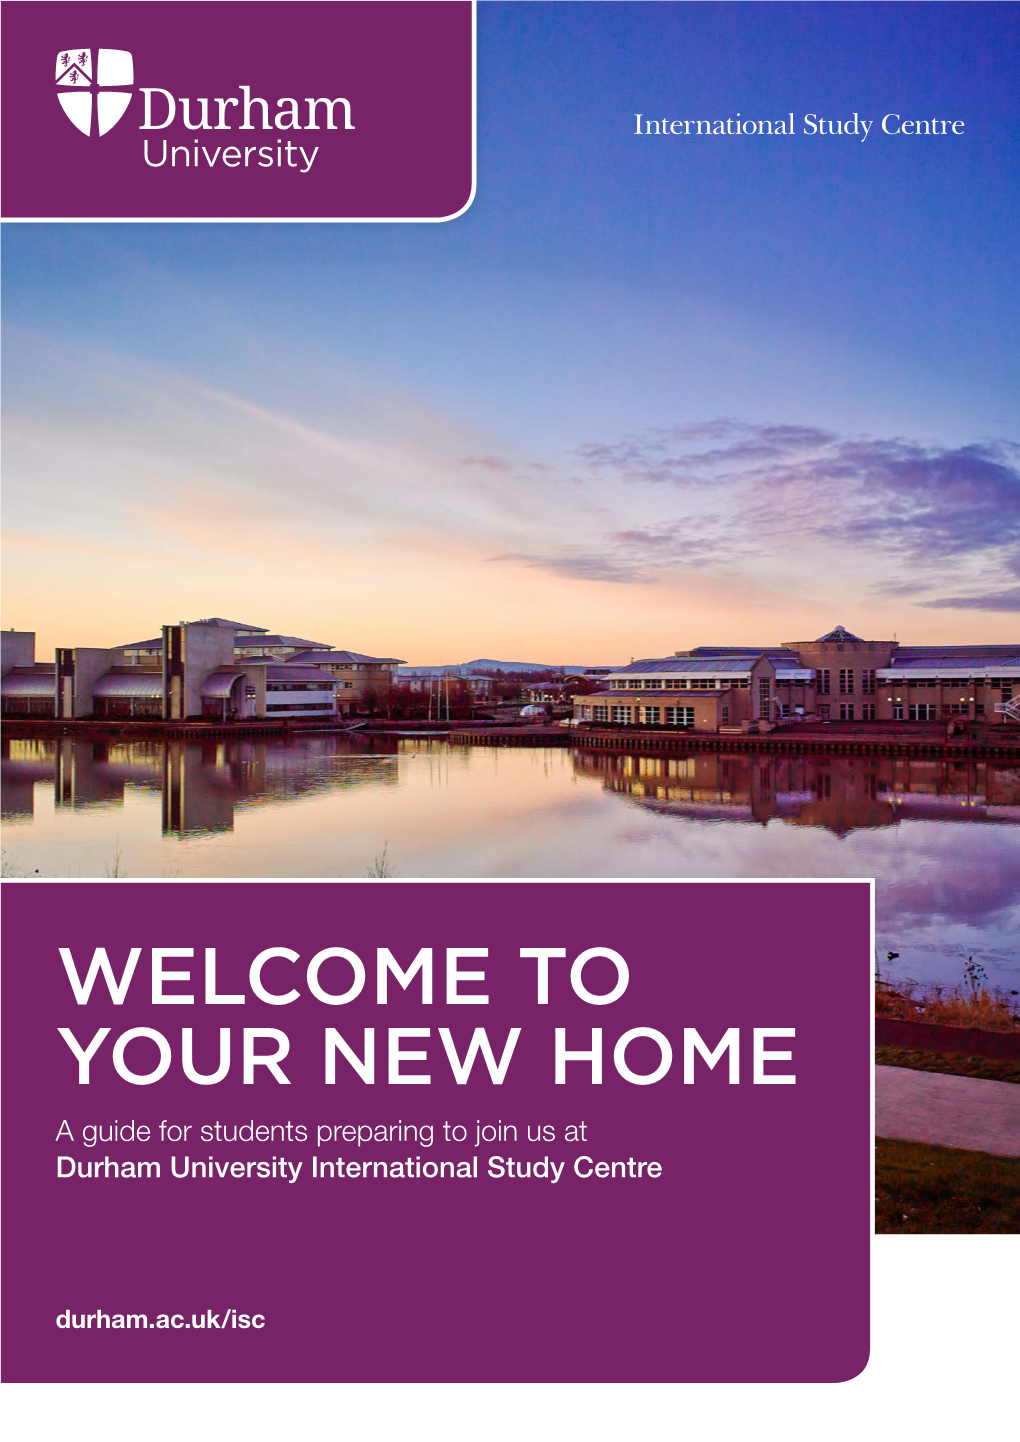 WELCOME to YOUR NEW HOME a Guide for Students Preparing to Join Us at Durham University International Study Centre